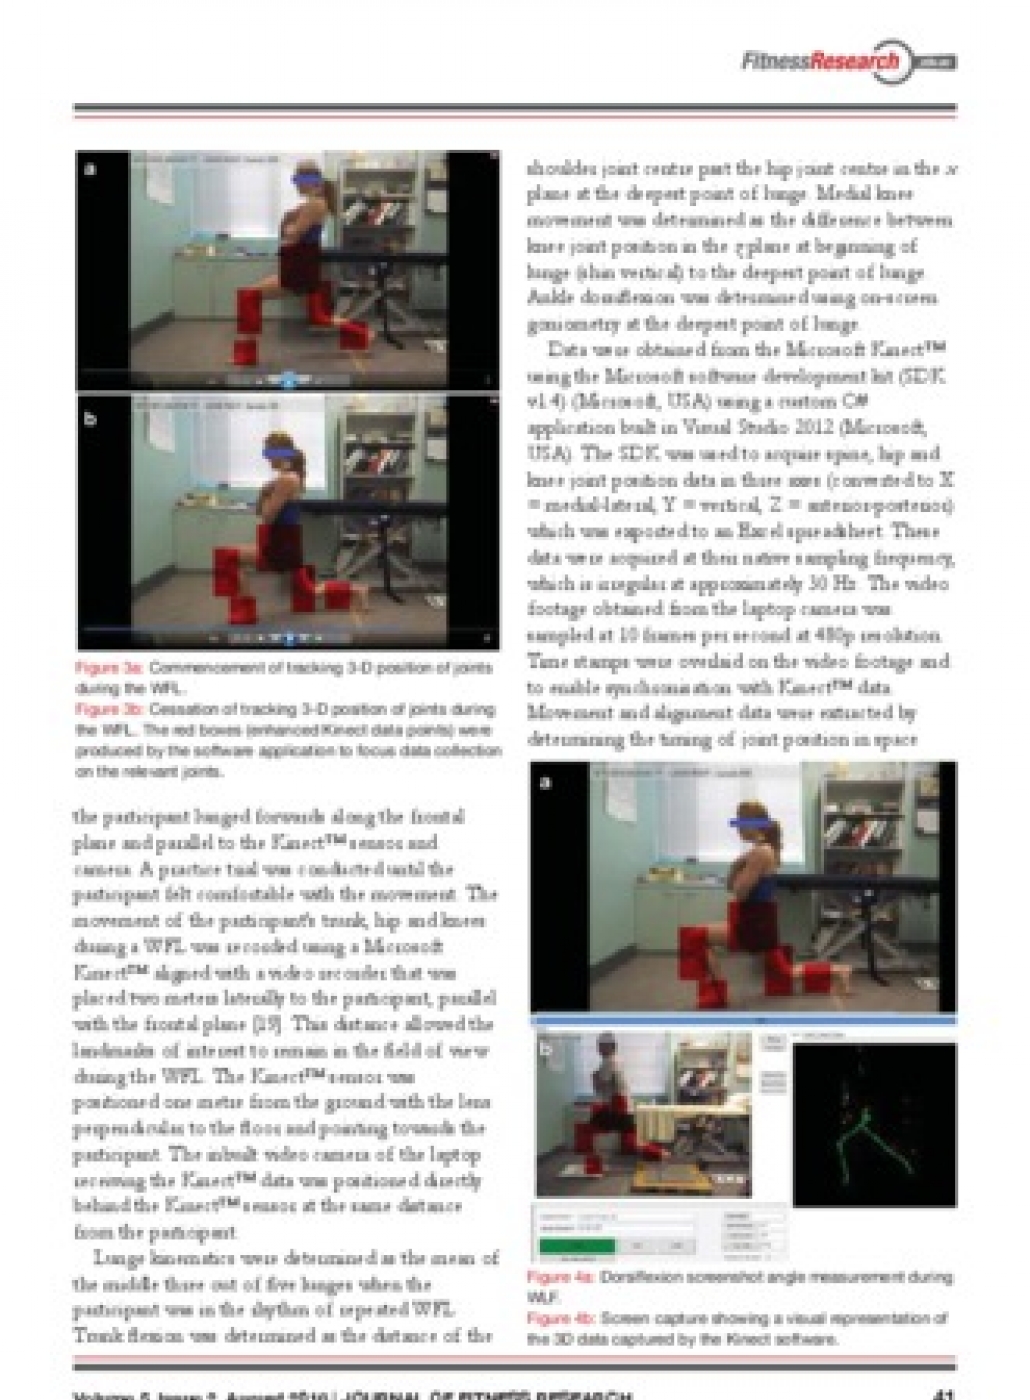 Can hip extension torque predict performance during a walking lunge?